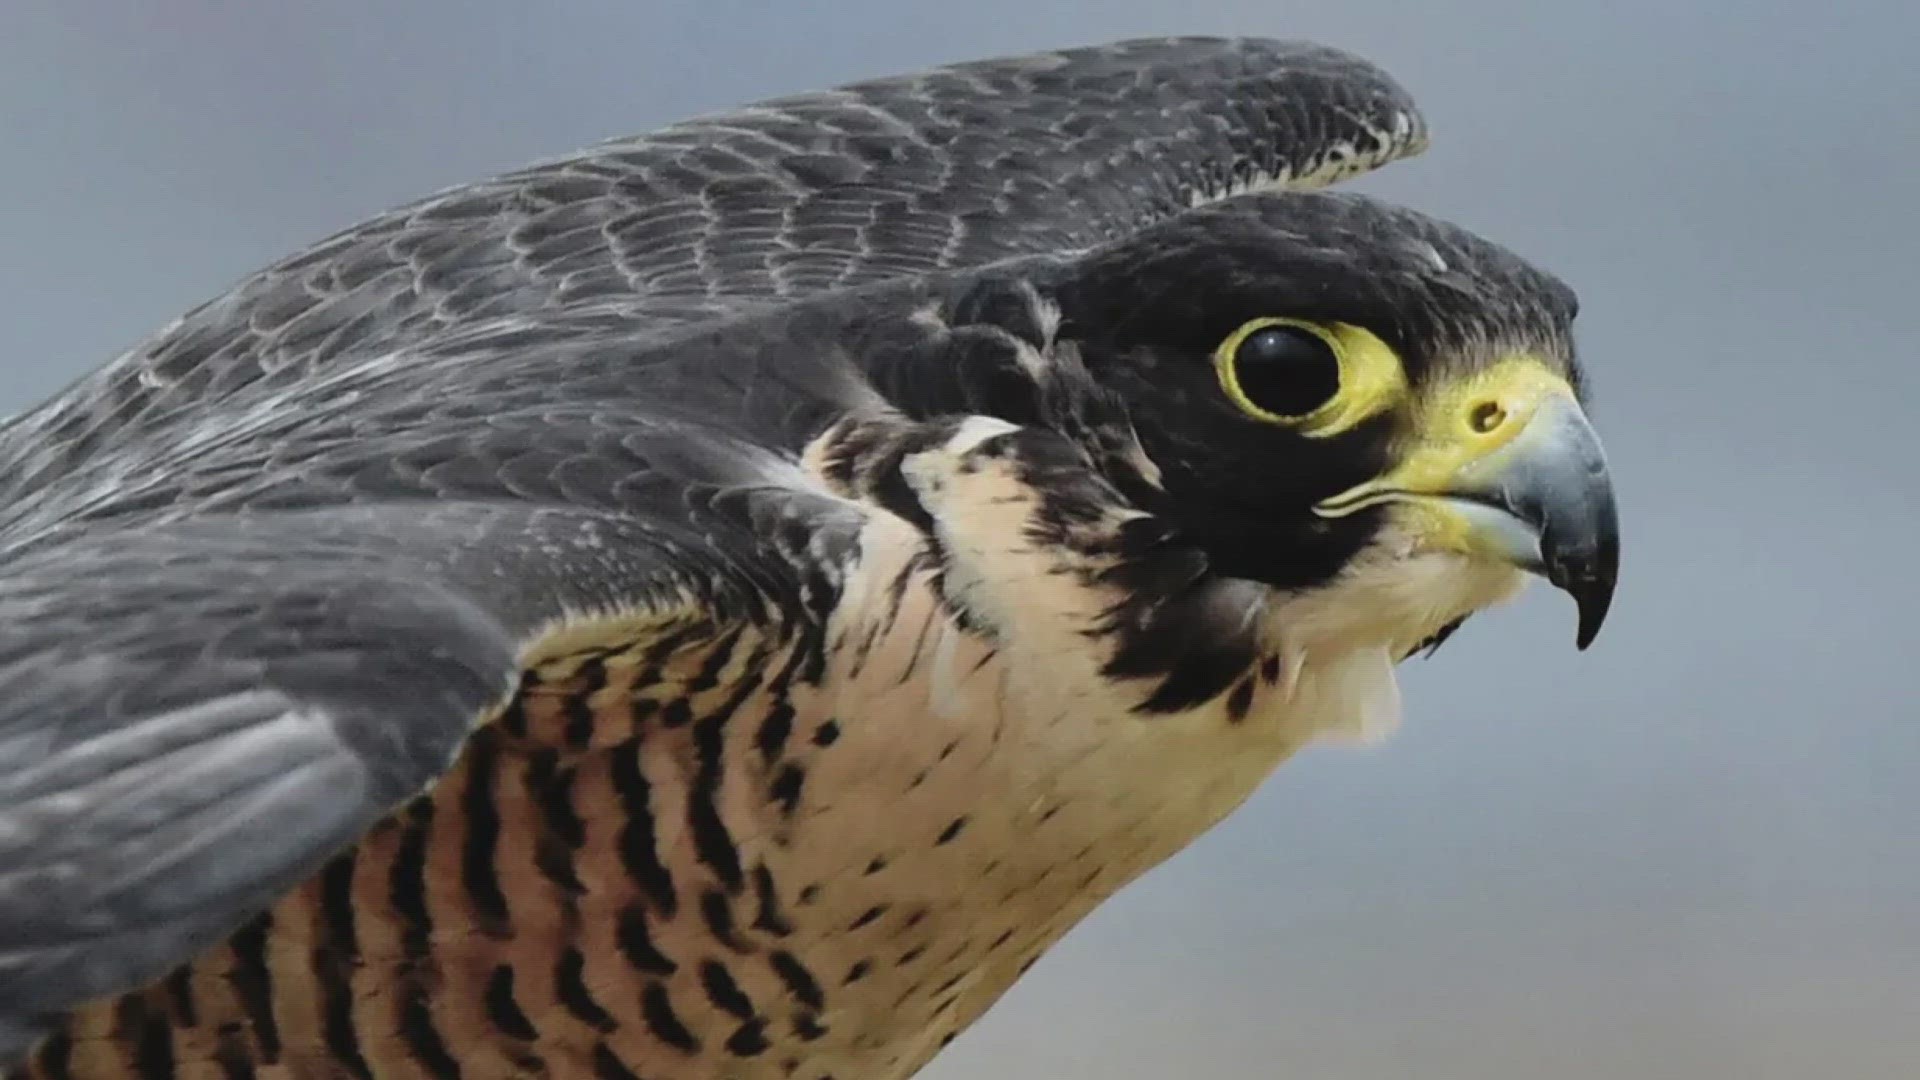 Starting Feb. 1 and ending May 31, the park will be once again closing select areas in the Chisos Mountains to protect the falcons.